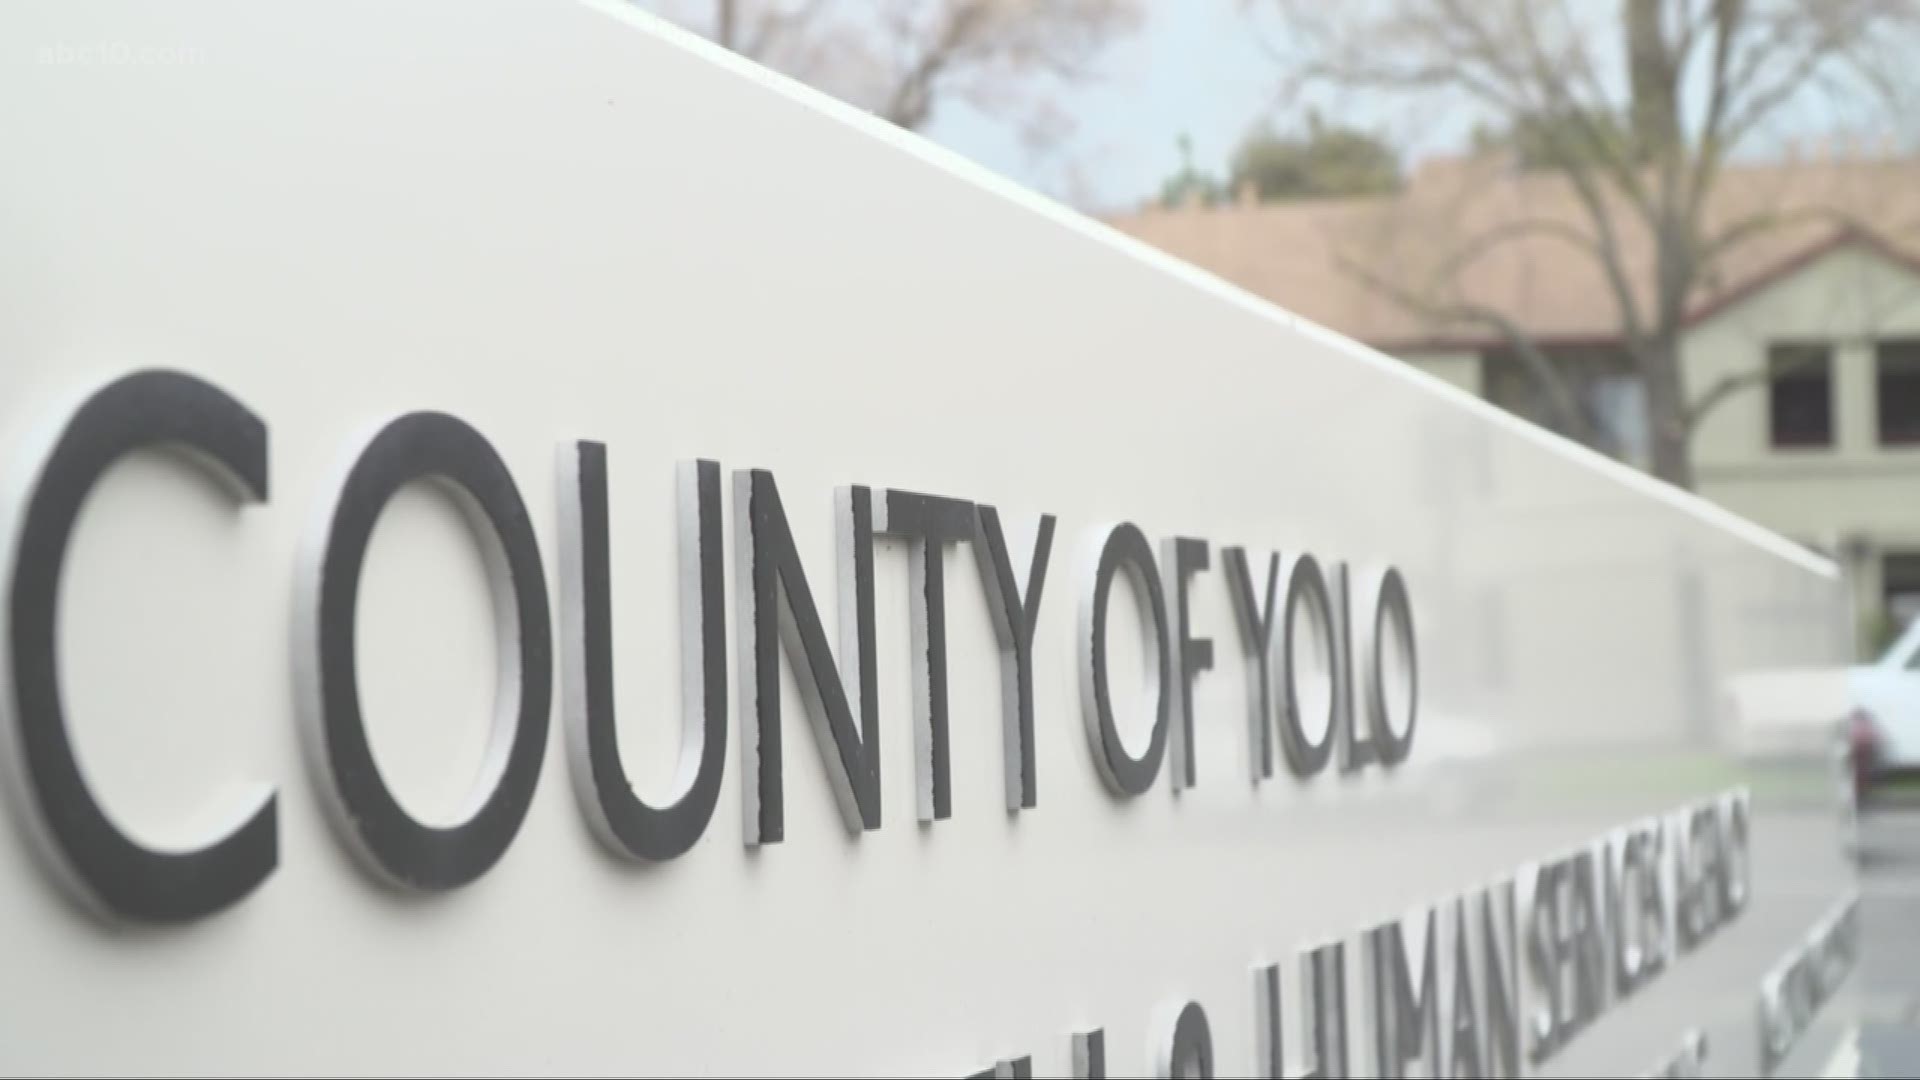 Ahead of the 4th of July weekend, Yolo County is closing some in-door activities like restaurants, bars, wineries and more.